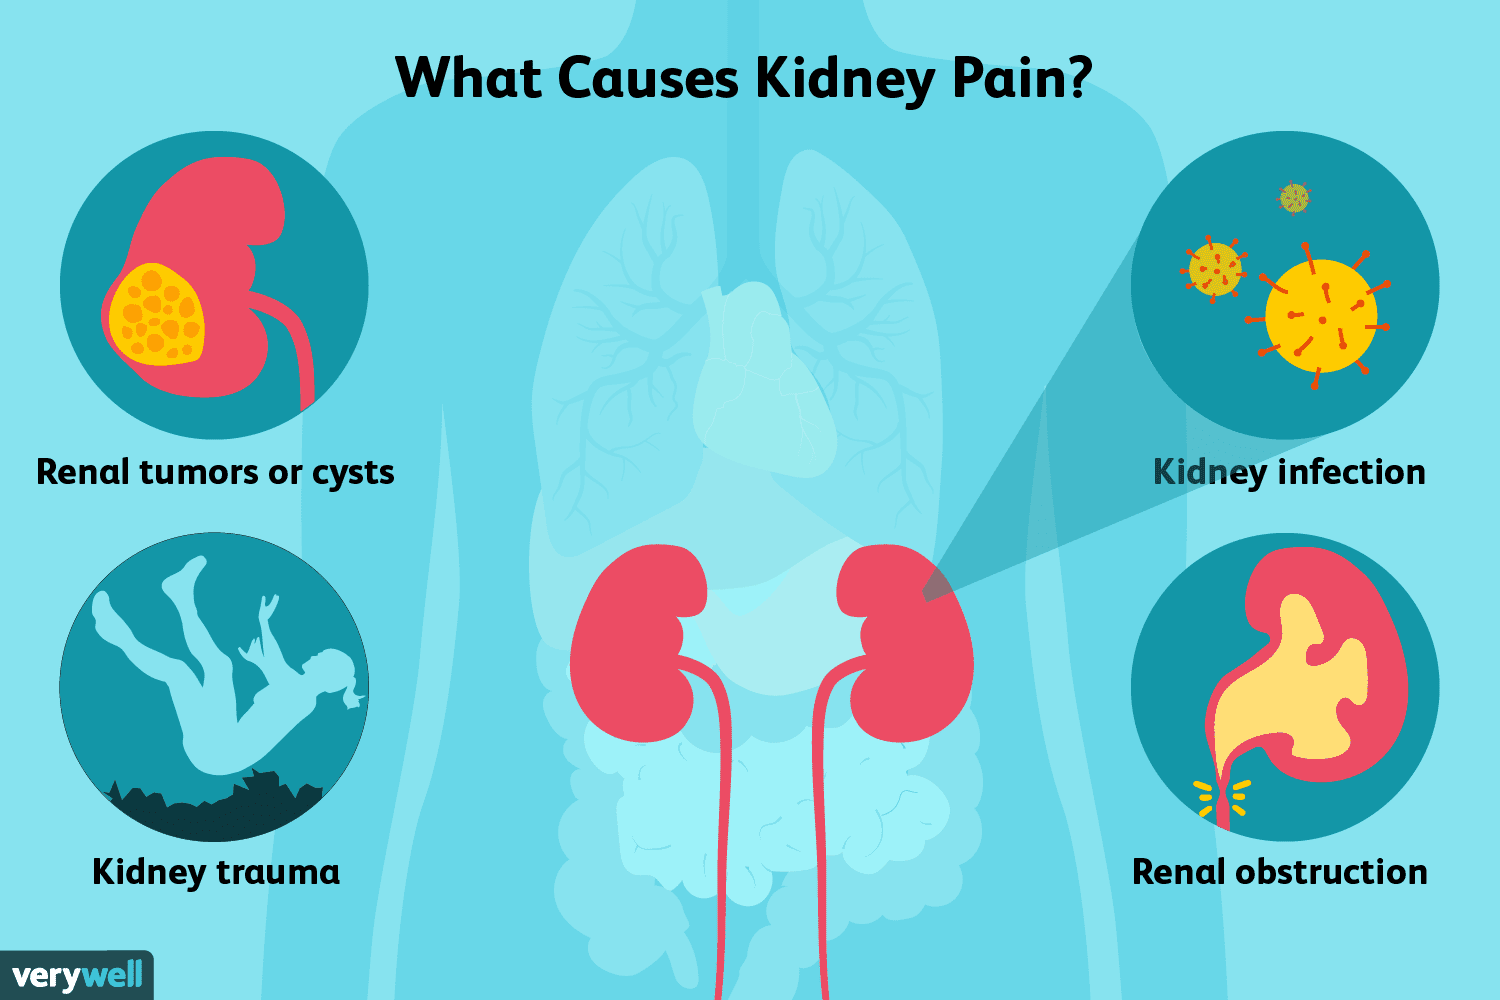 Kidney Pain: Causes, Treatment, and When to See a Doctor